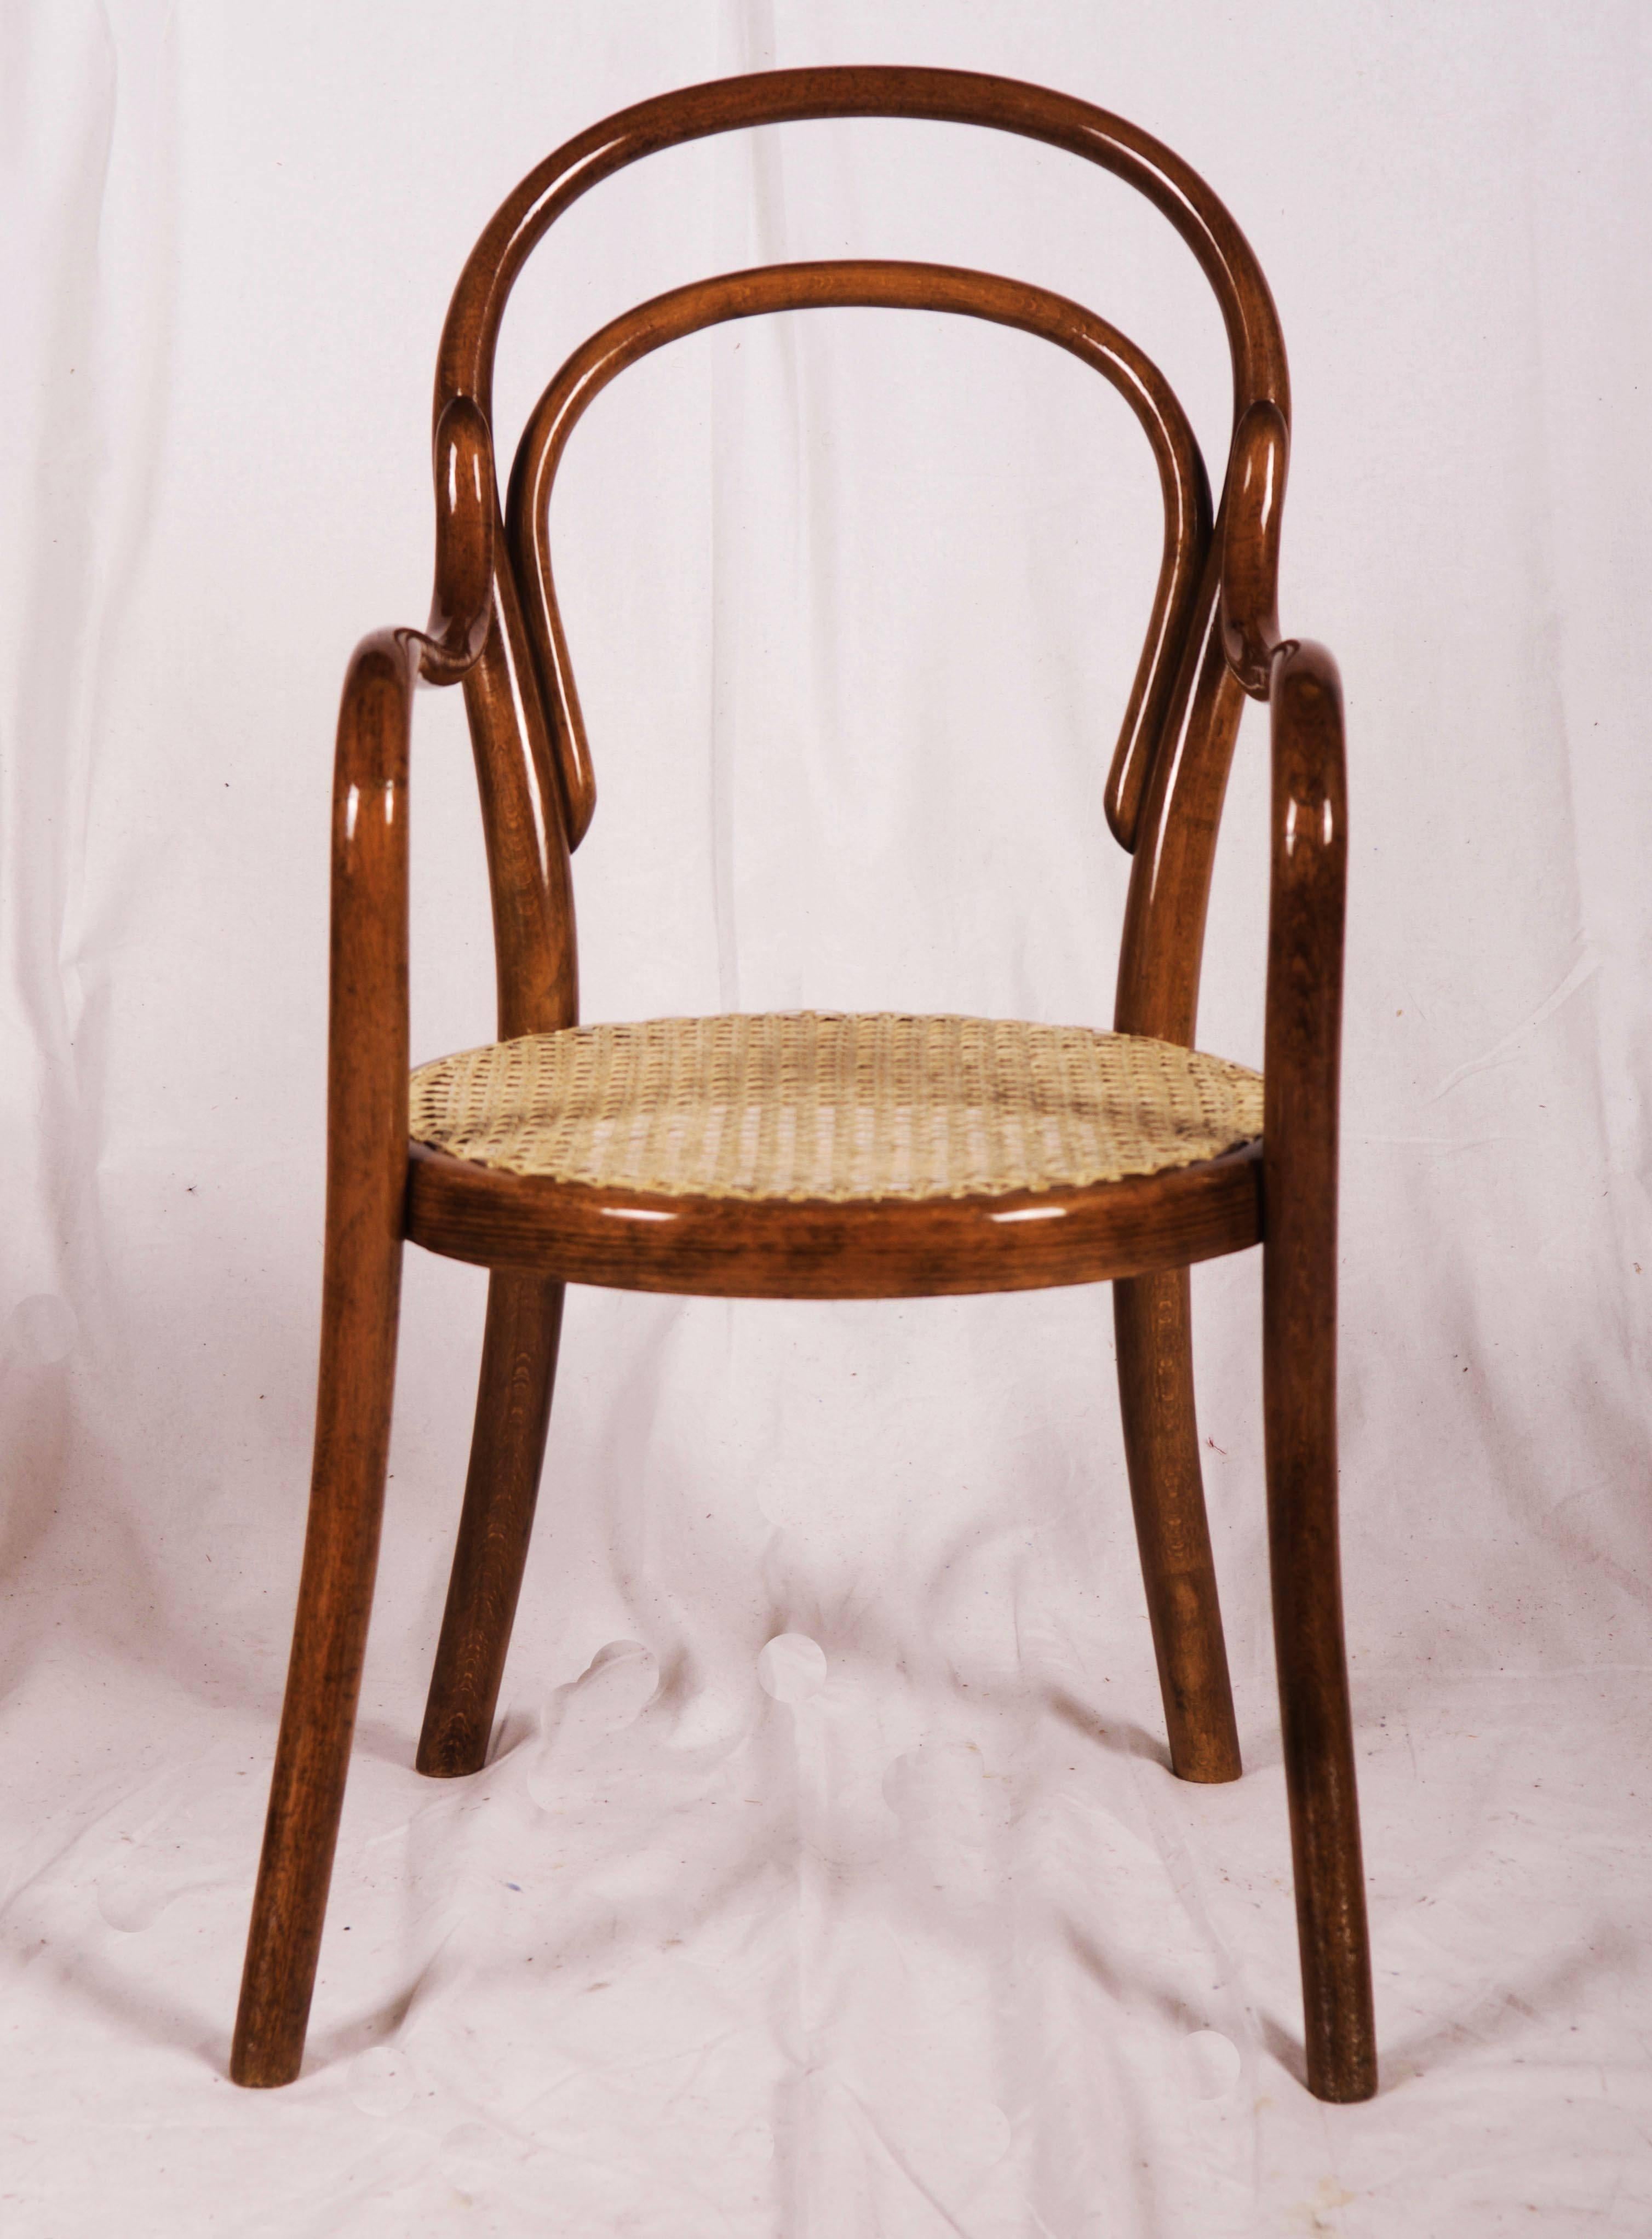 Beech bentwood Thonet Nr. 1 first time mentioned in the catalogue from the 1880s. This one is from 1910s-1920s.
Chair is fully restored, walnut stained and shellack polished with new canning.
Singed on the frame.